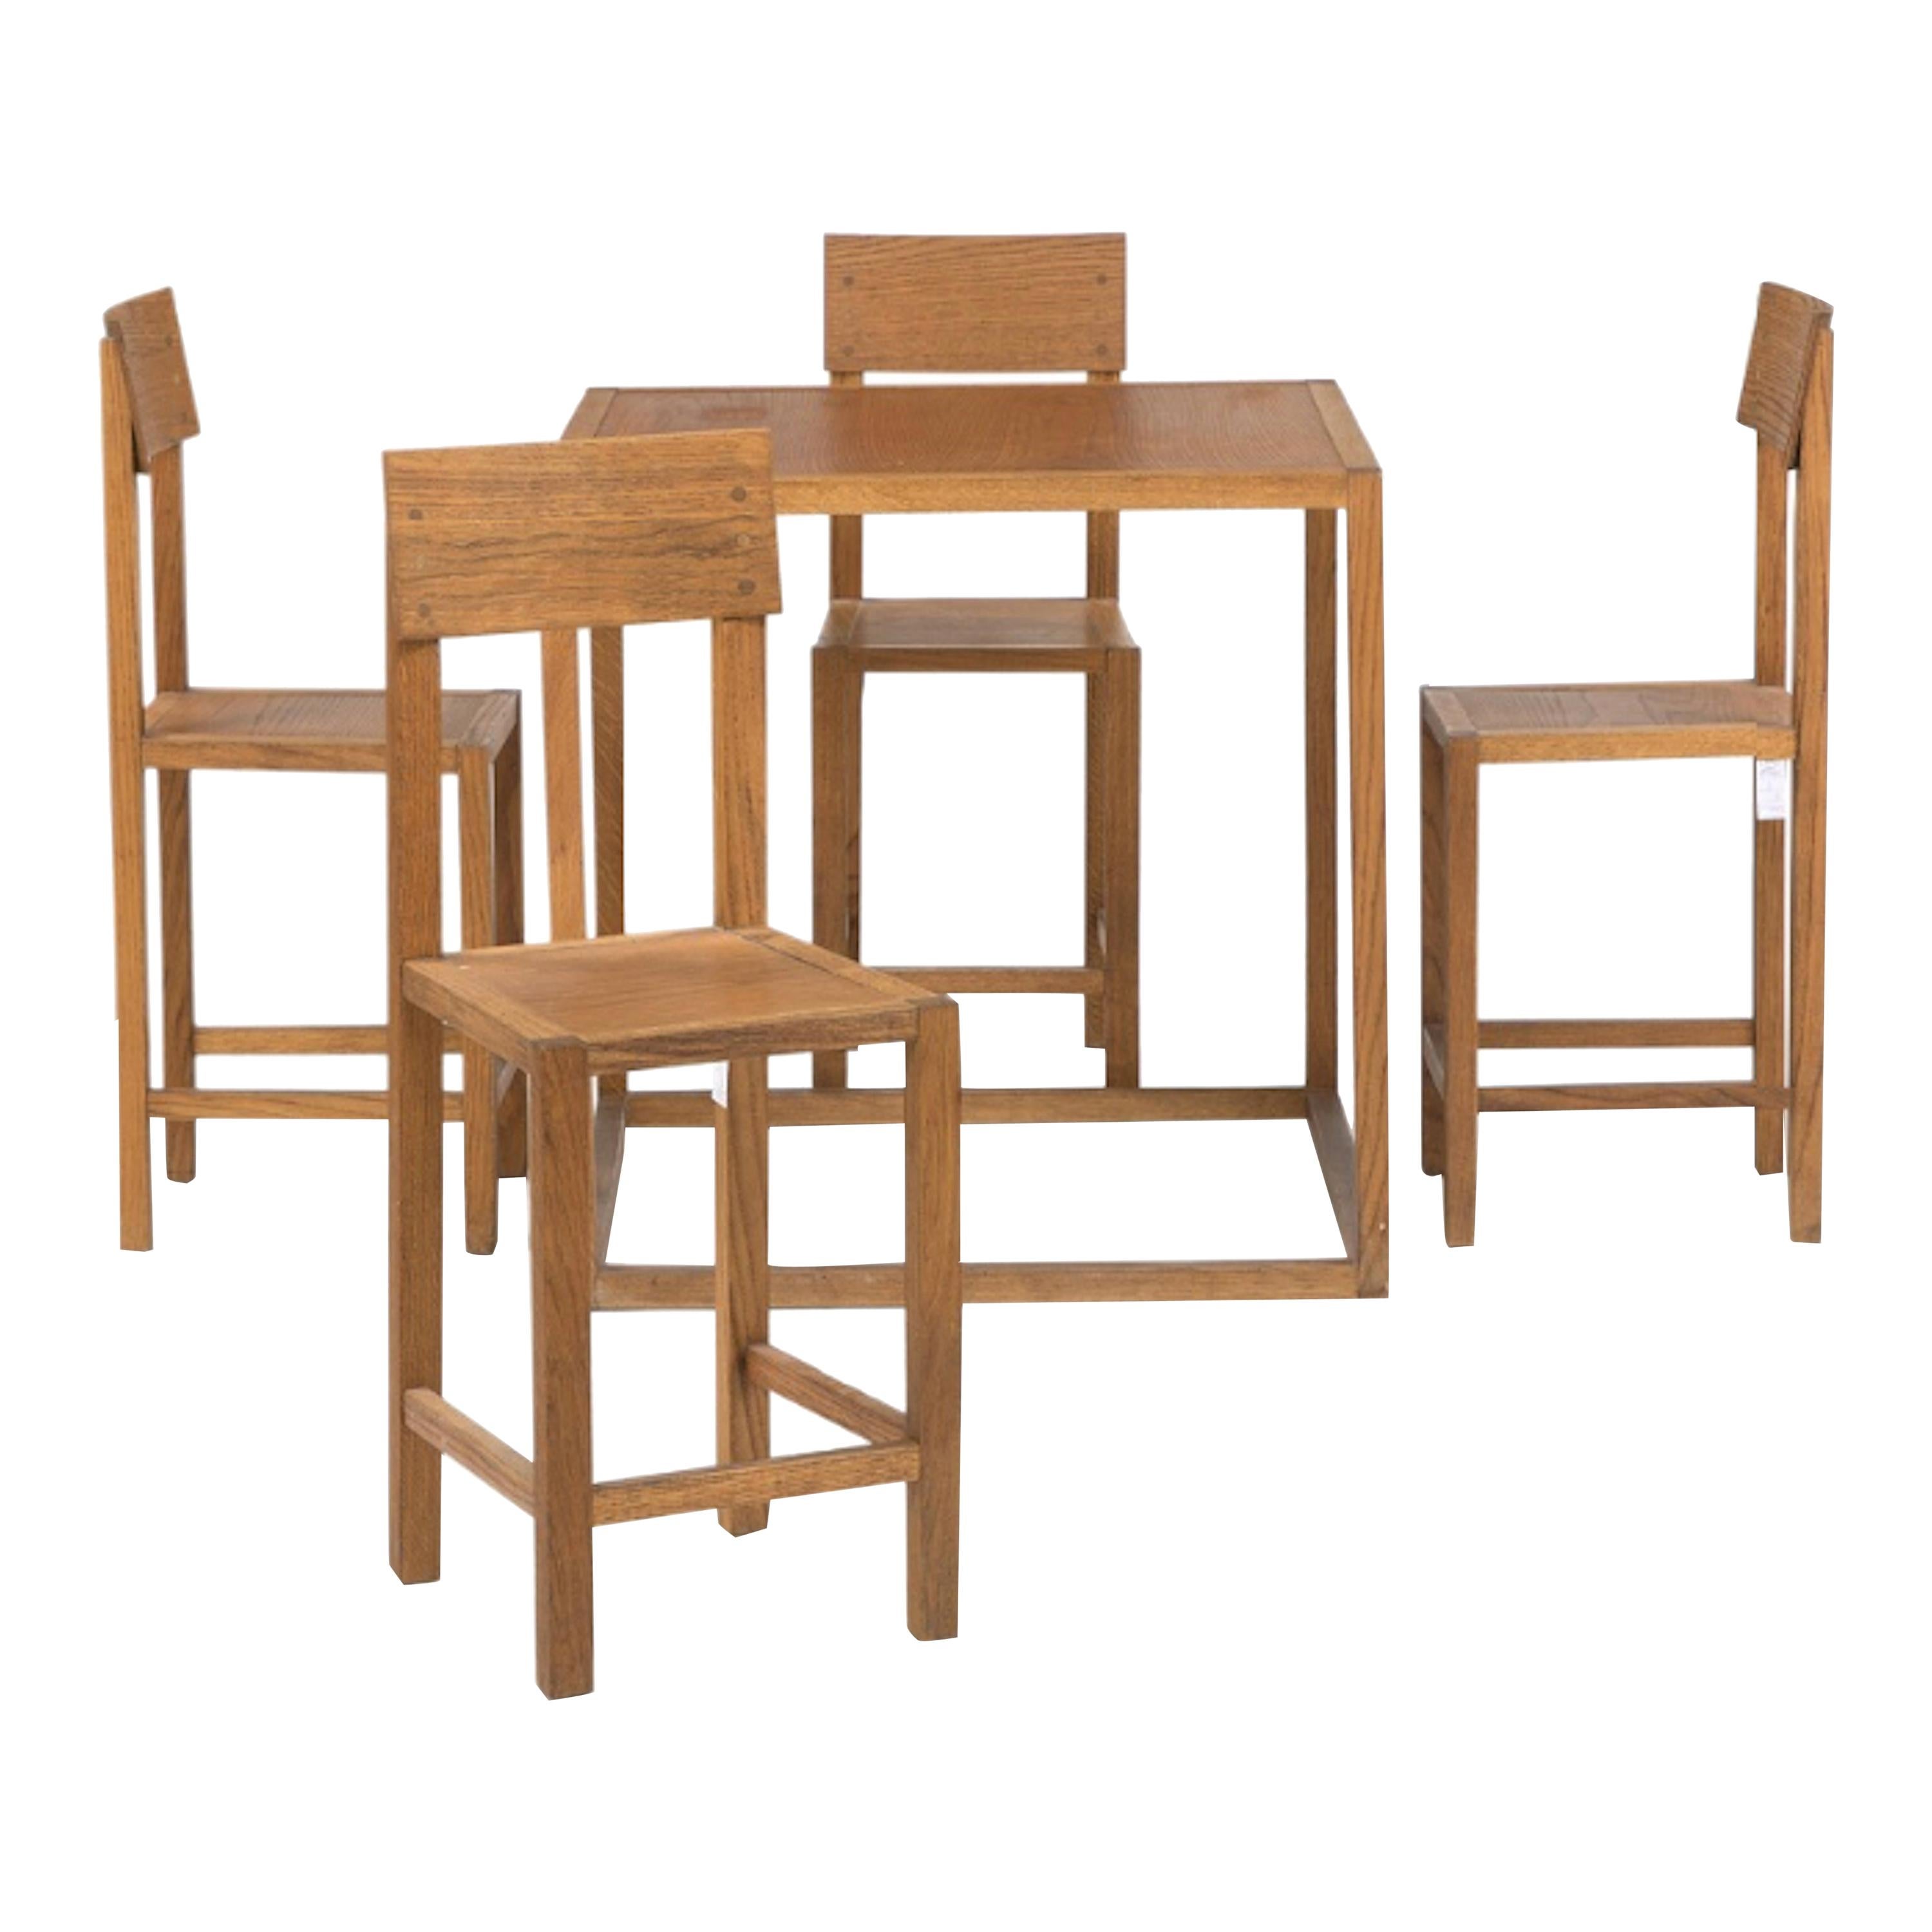 Mario Prandina Dining Table and Four Oak Chairs, Model Cubo and Seggiola, 1960